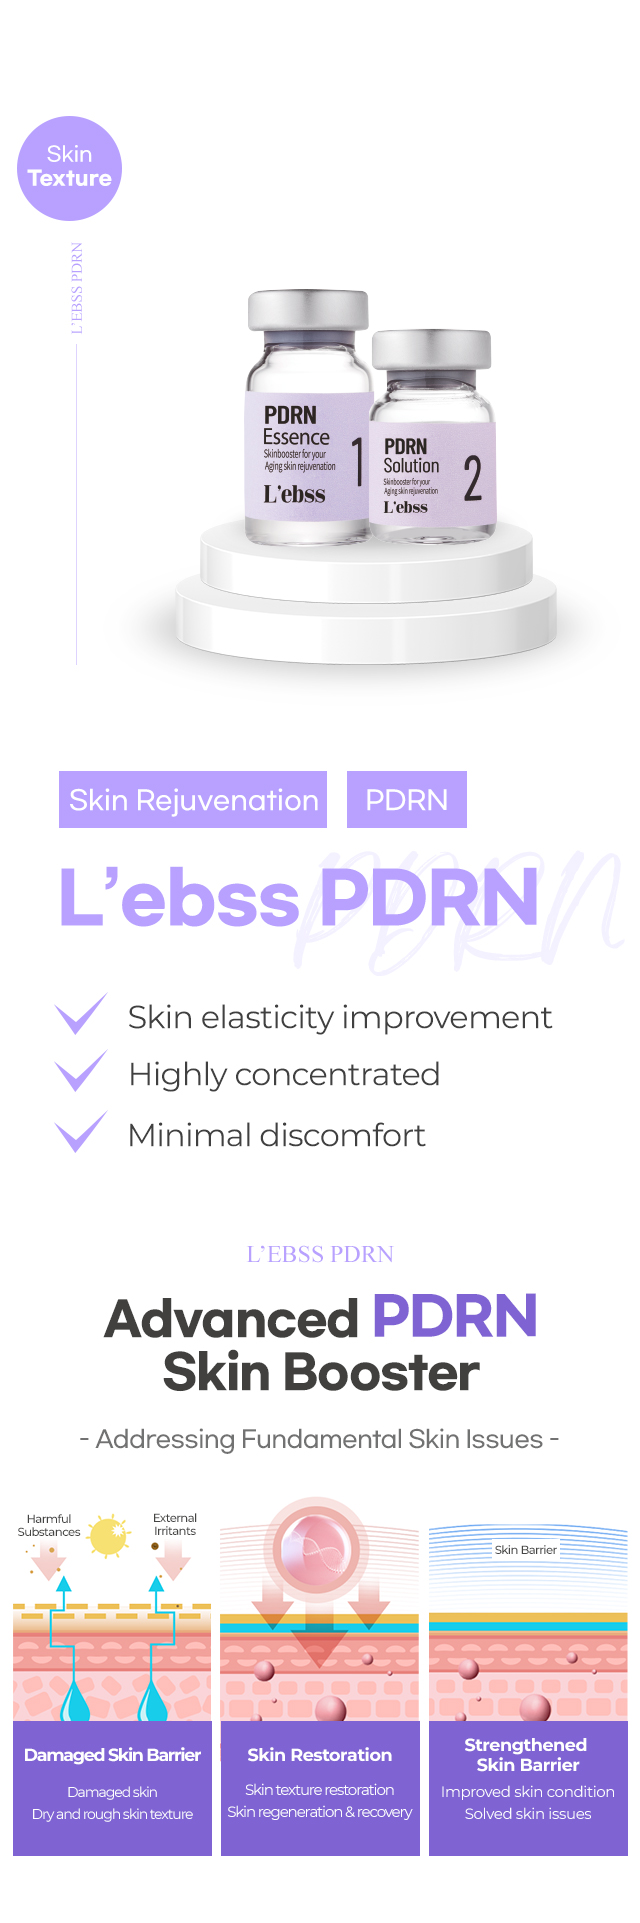 L'ebss PDRN MTS Microneedling skin booster descriptive page microneedling treatment for skin rejuvenation and skin elasticity improvement in Korea, main ingredient contains salmon DNA